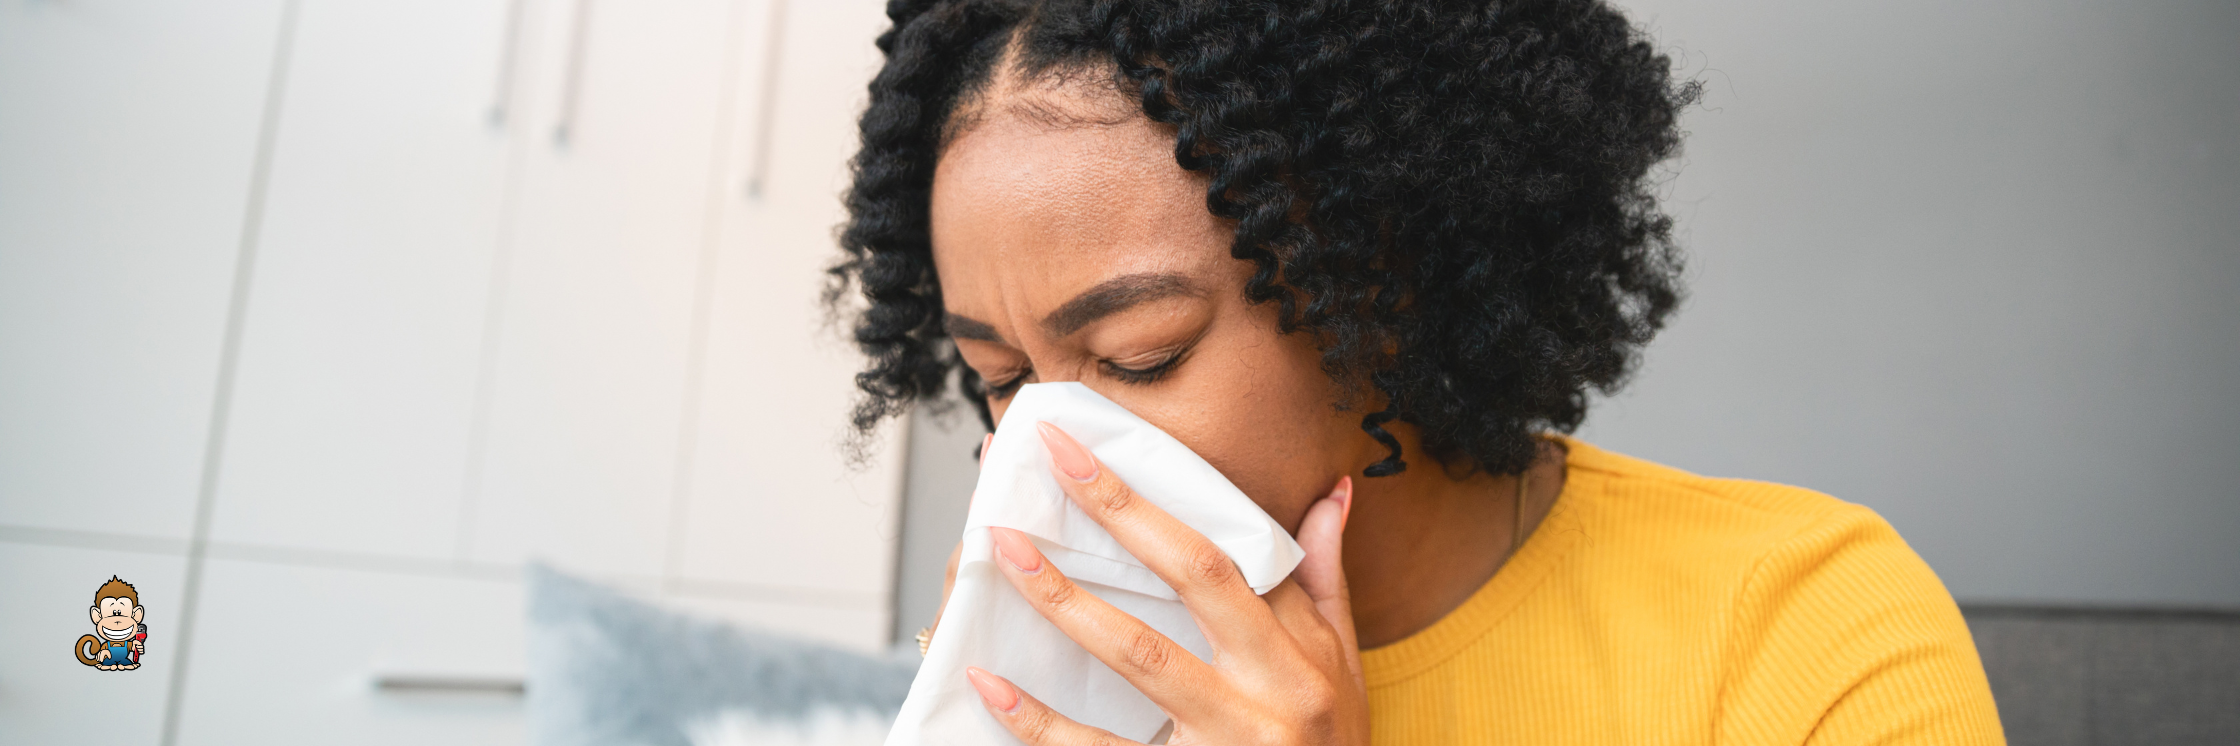 Best Air Filters for Allergies